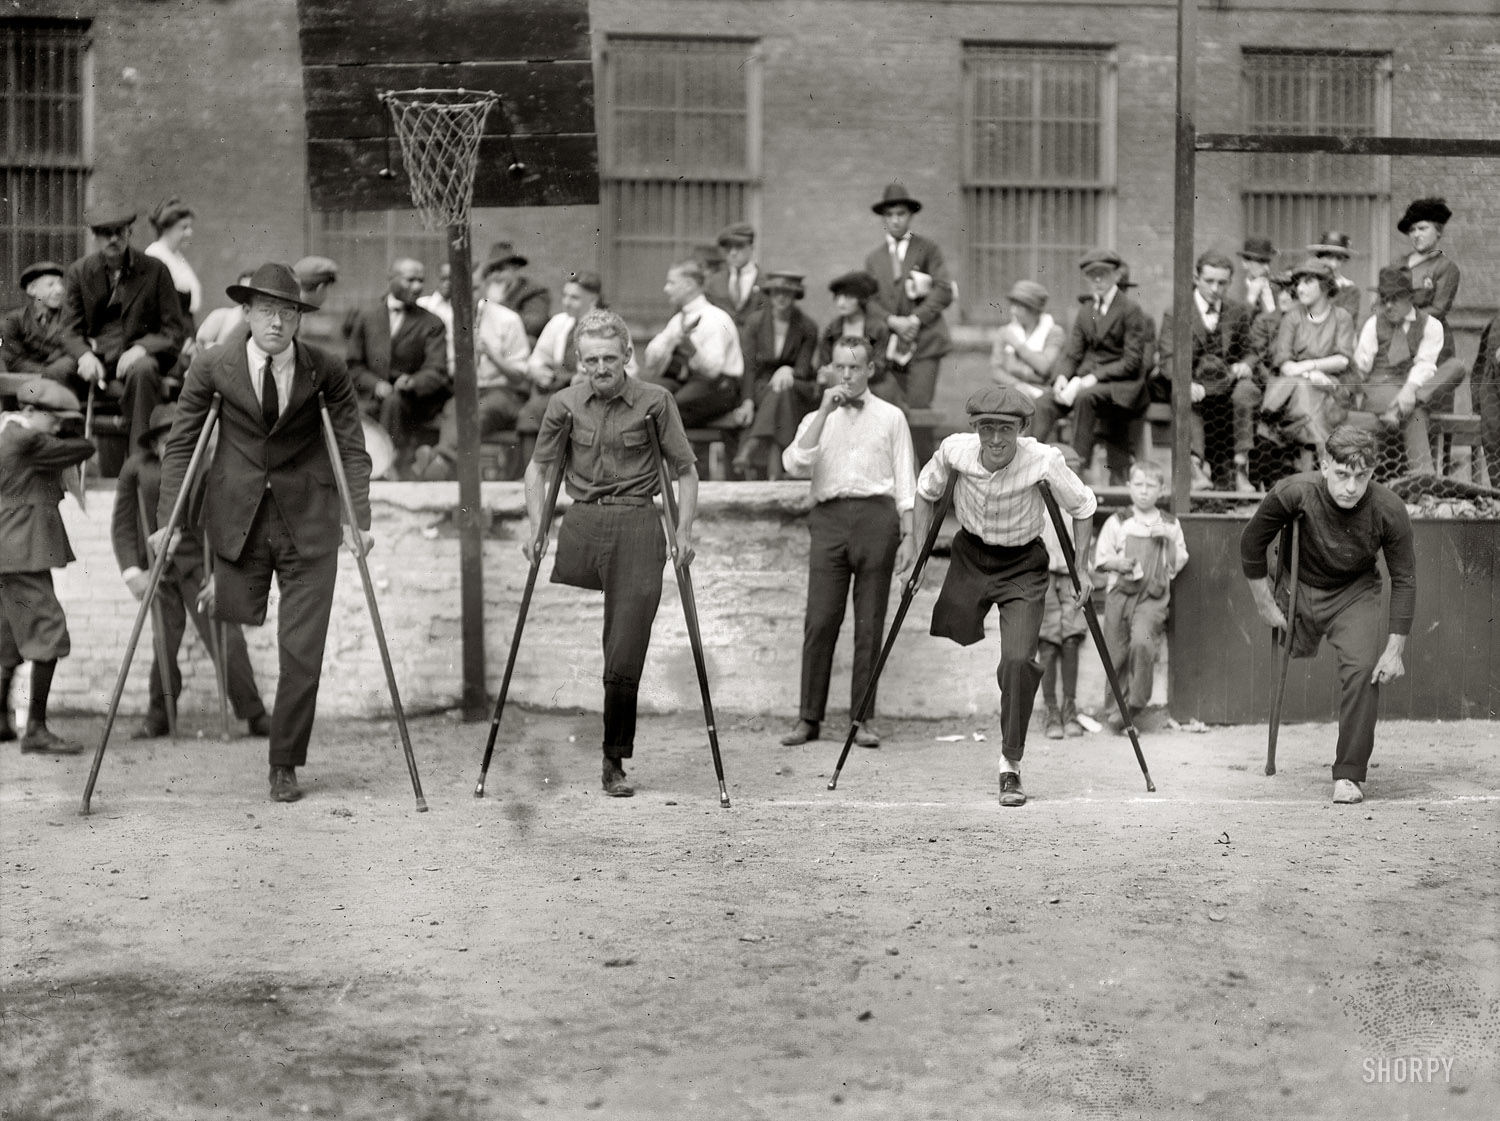 New York City circa 1918. "Start of cripples' one-legged race." 5x7 glass negative, George Grantham Bain Collection. Library of Congress. View full size.